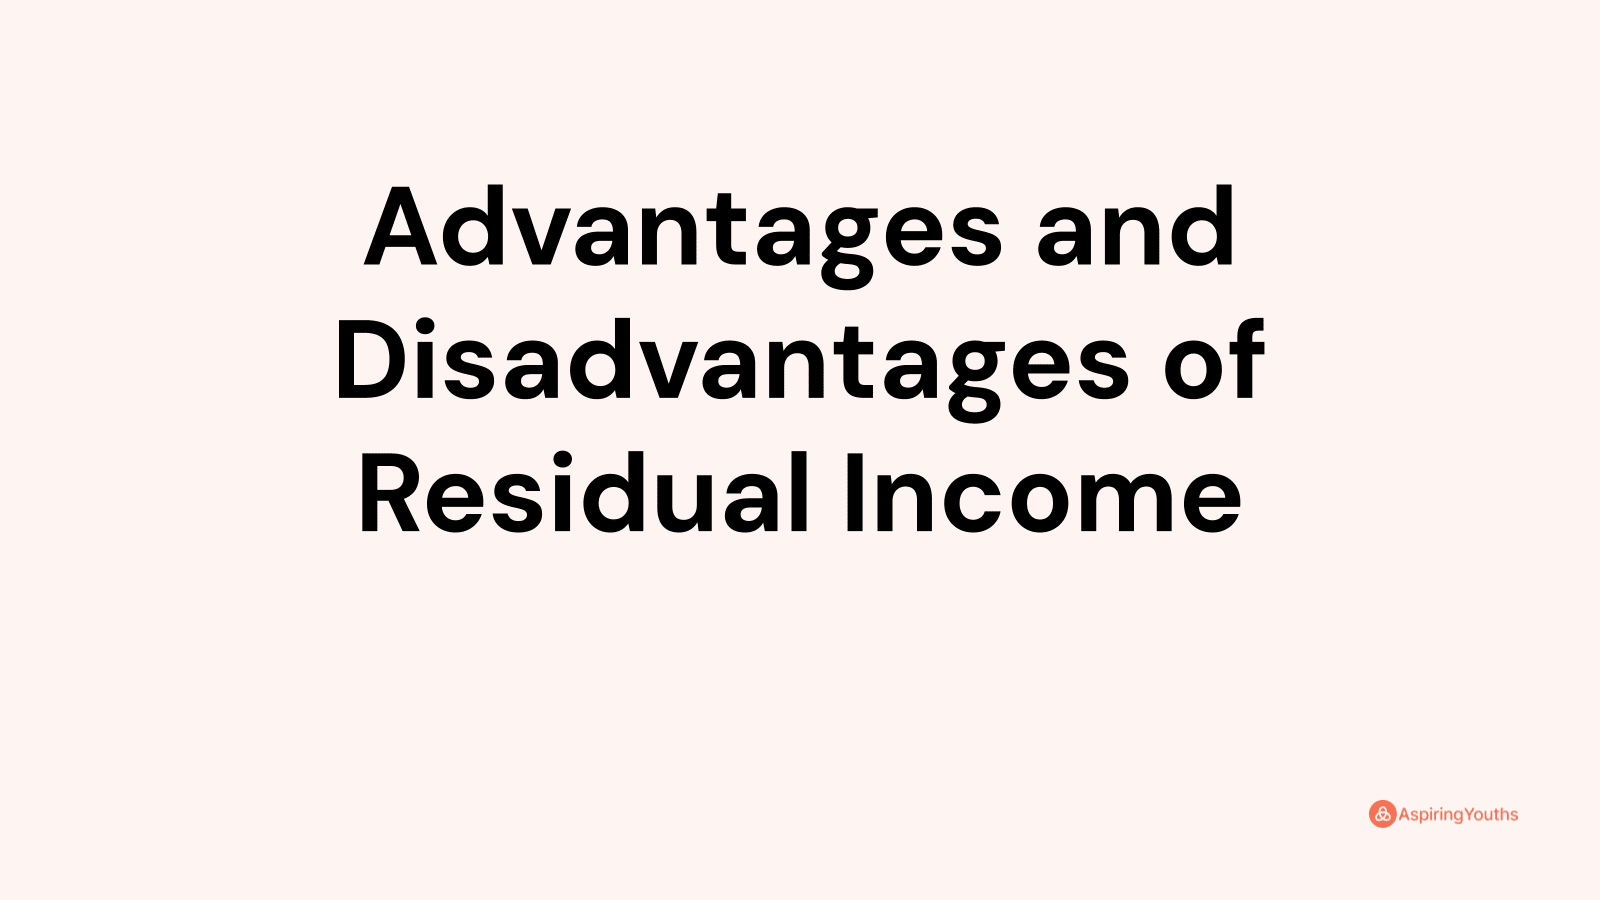 Advantages and disadvantages of Residual Income